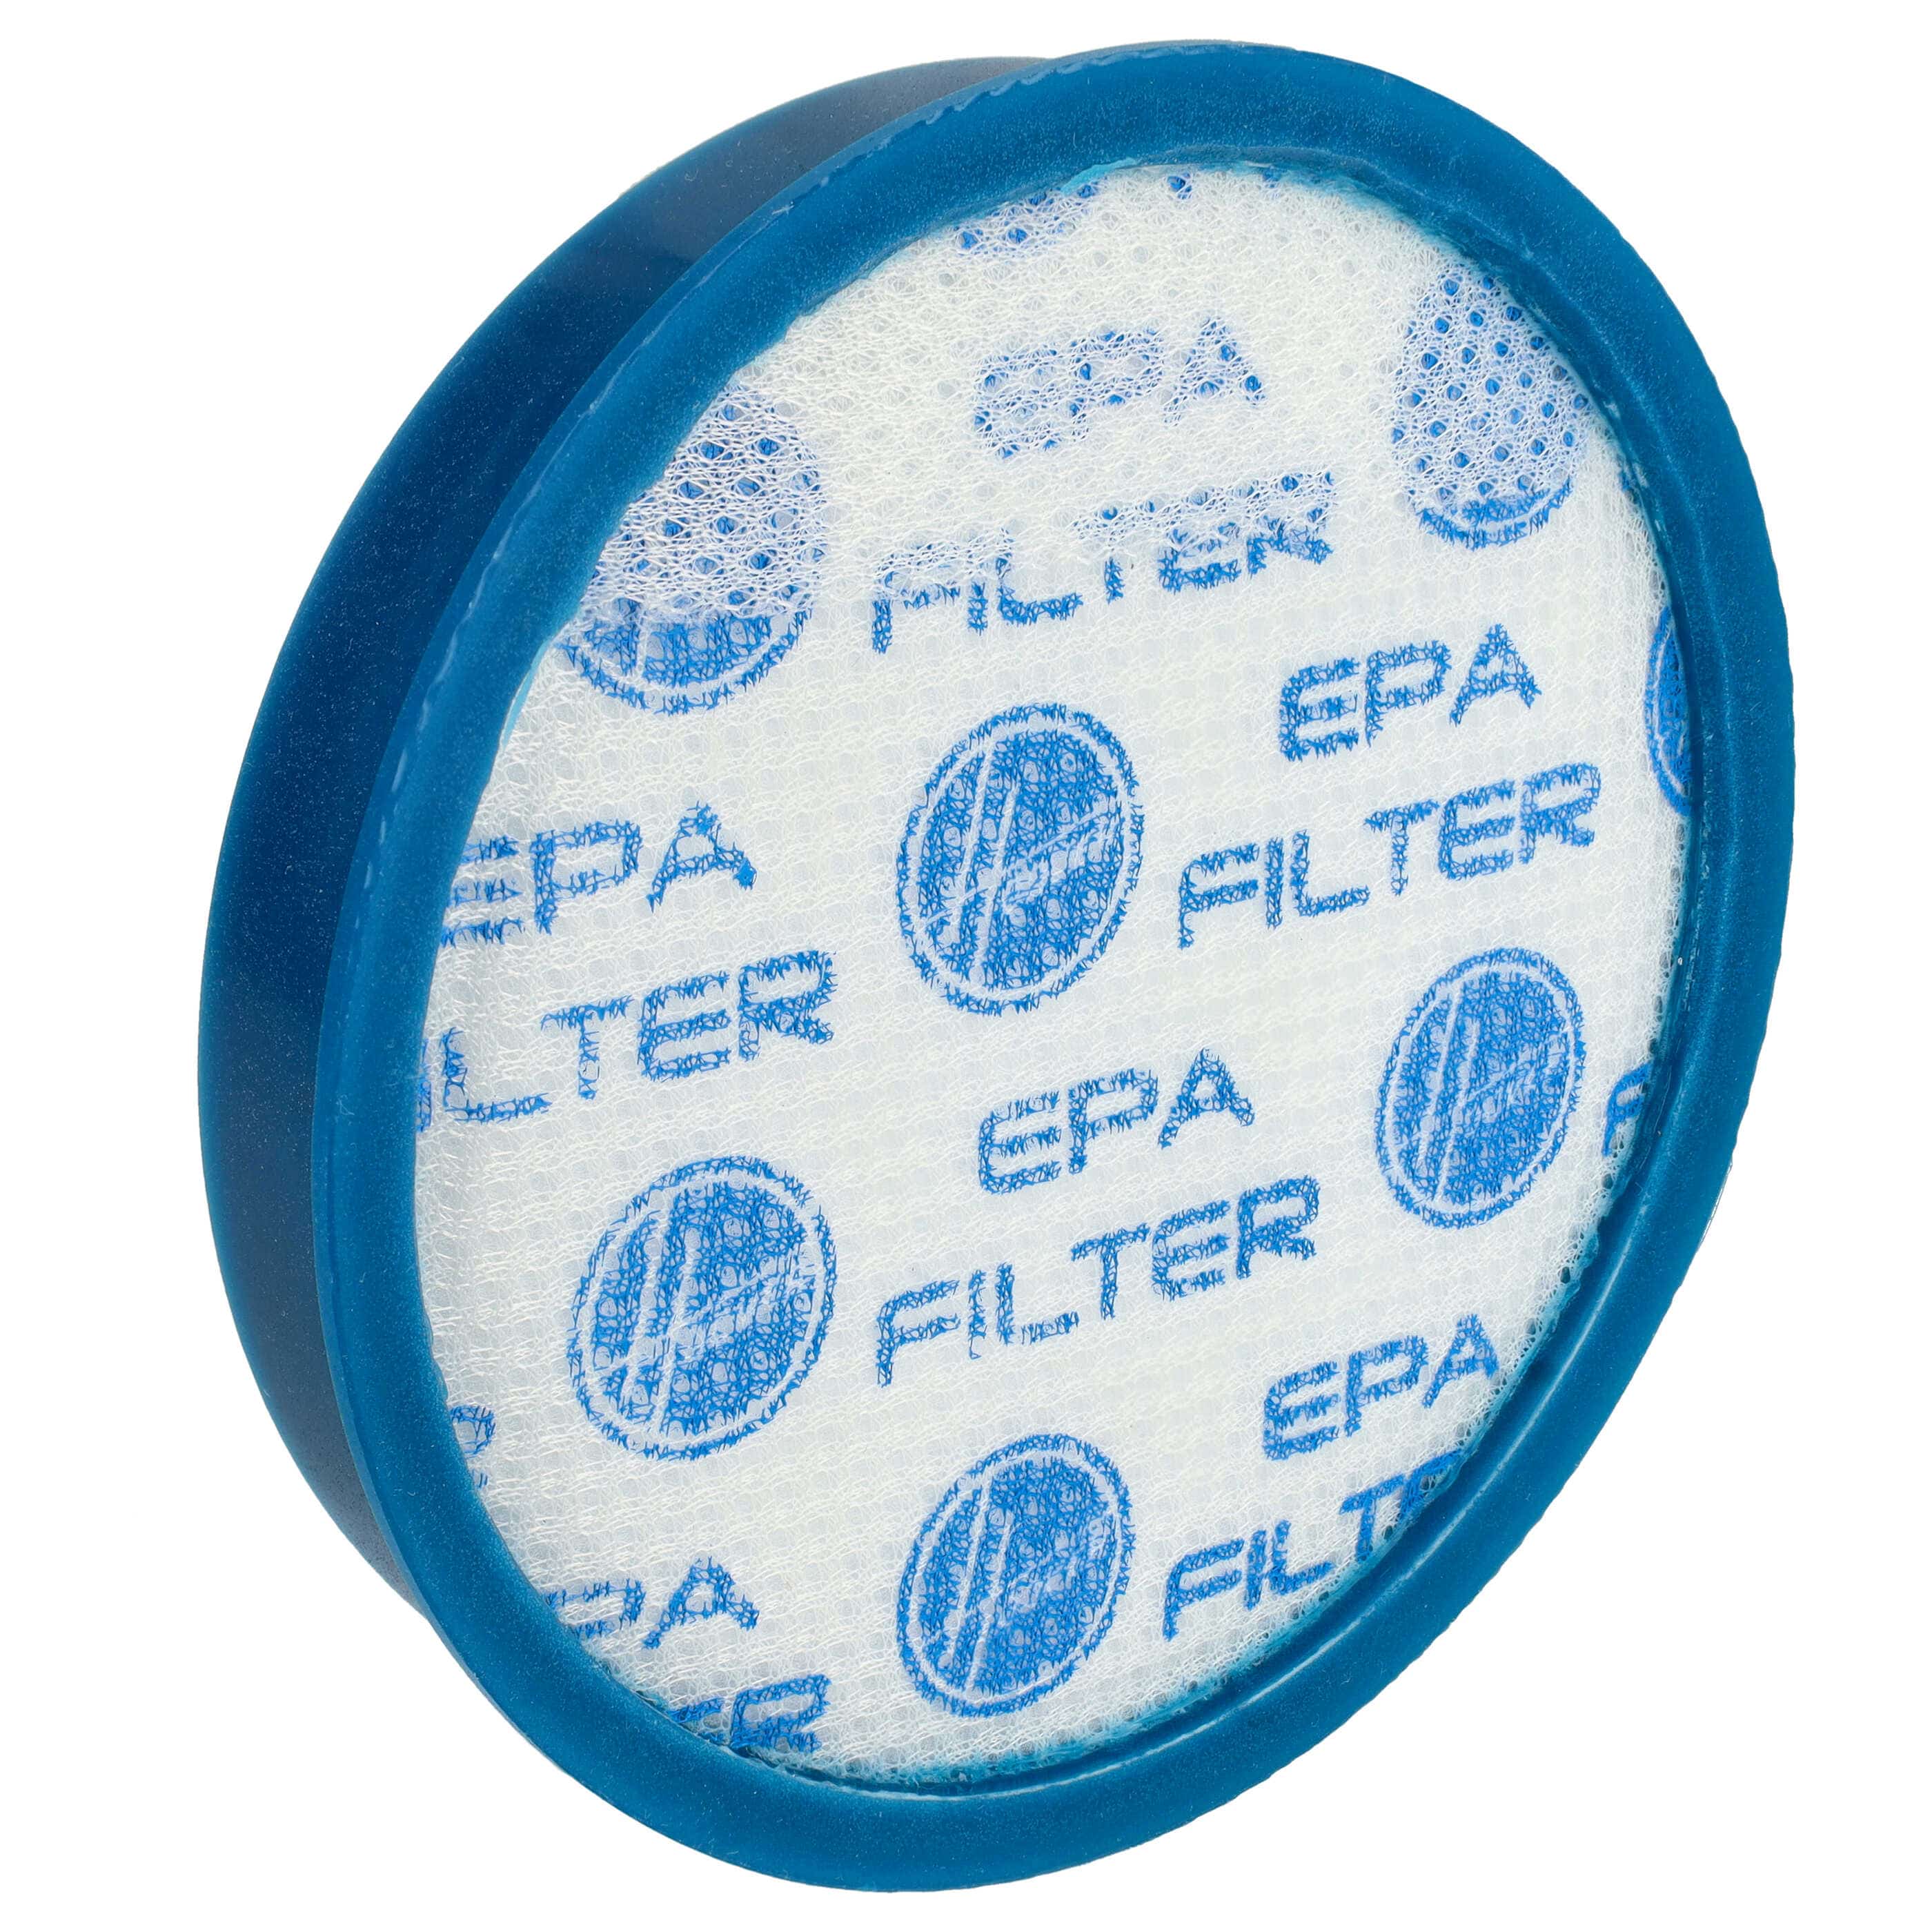 1x HEPA pre-motor filter replaces Hoover S115, 35601325 for Hoover Vacuum Cleaner